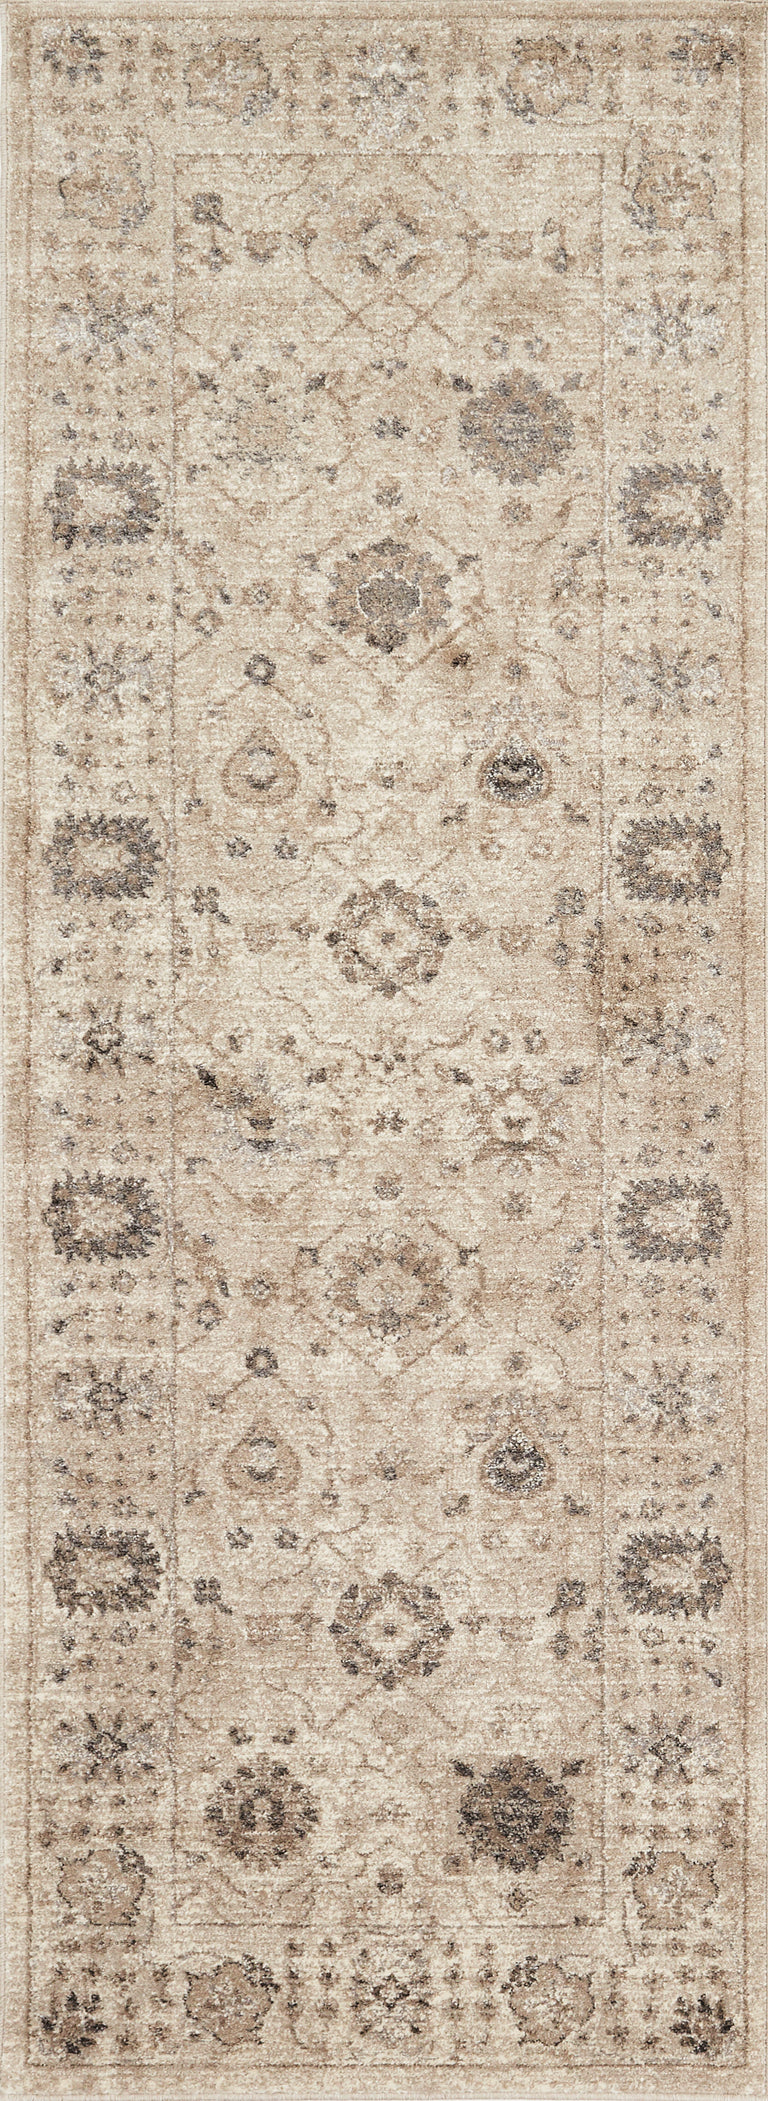 Loloi Rugs Century Collection Rug in Taupe, Taupe - 12'0" x 15'0"